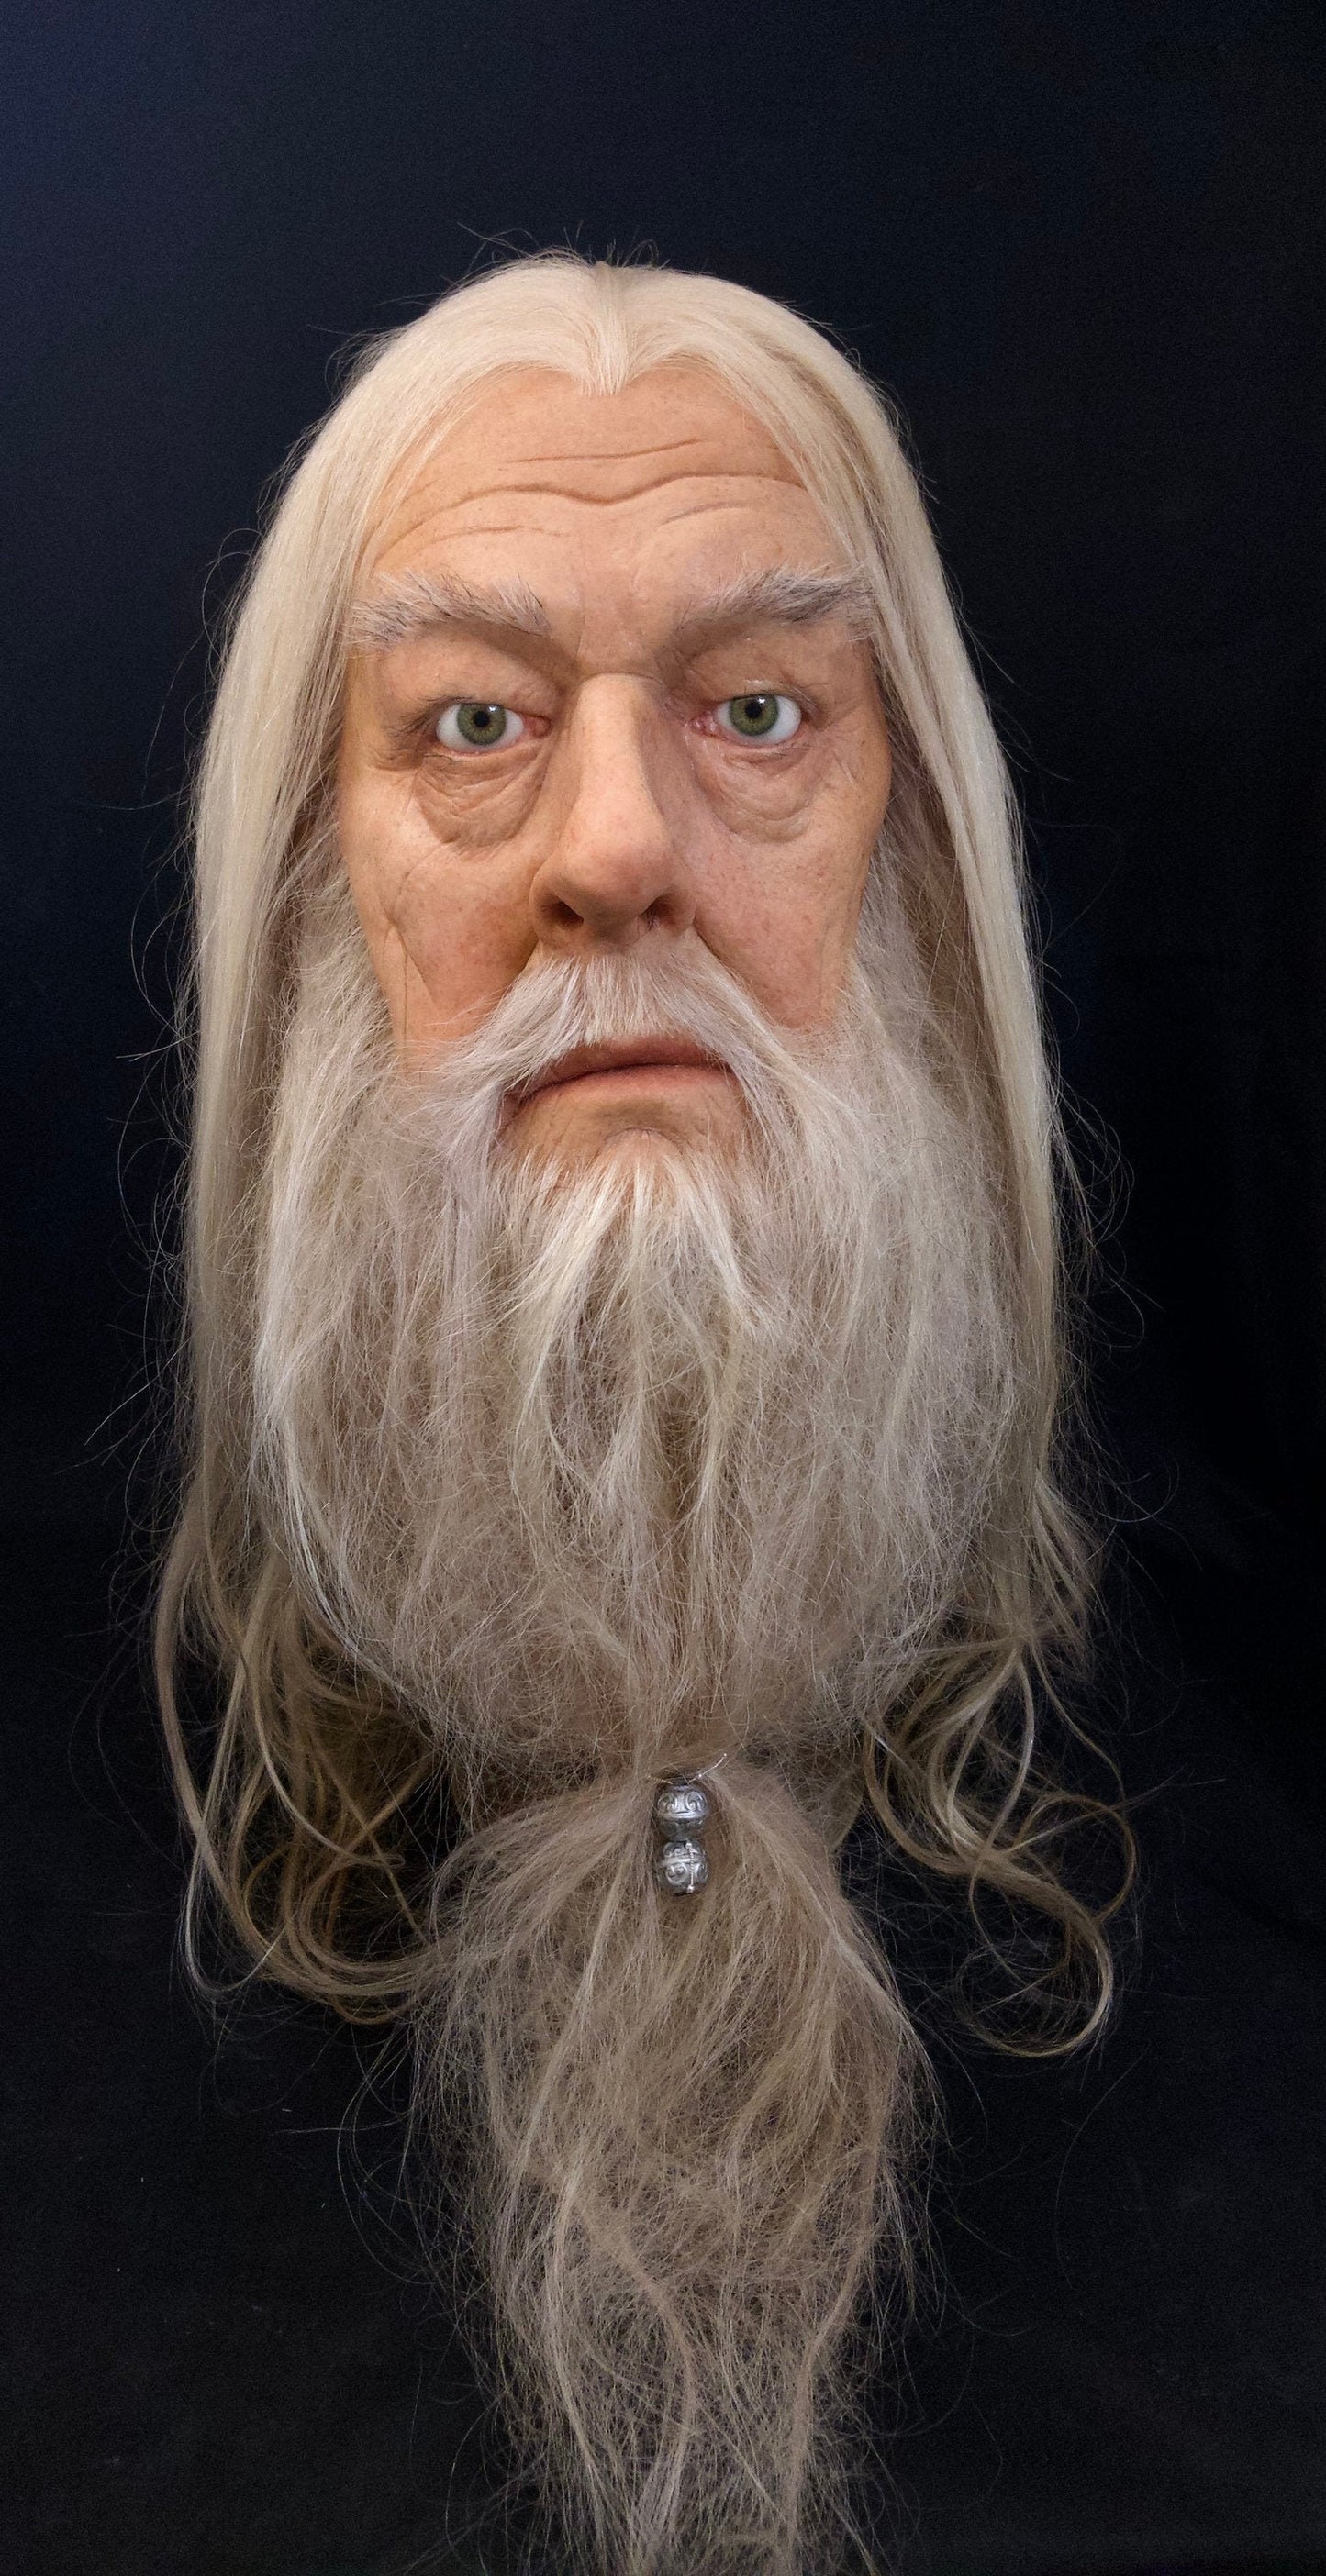 Dumbedore - harry potter 1:1 life -size silicone bust - made to order